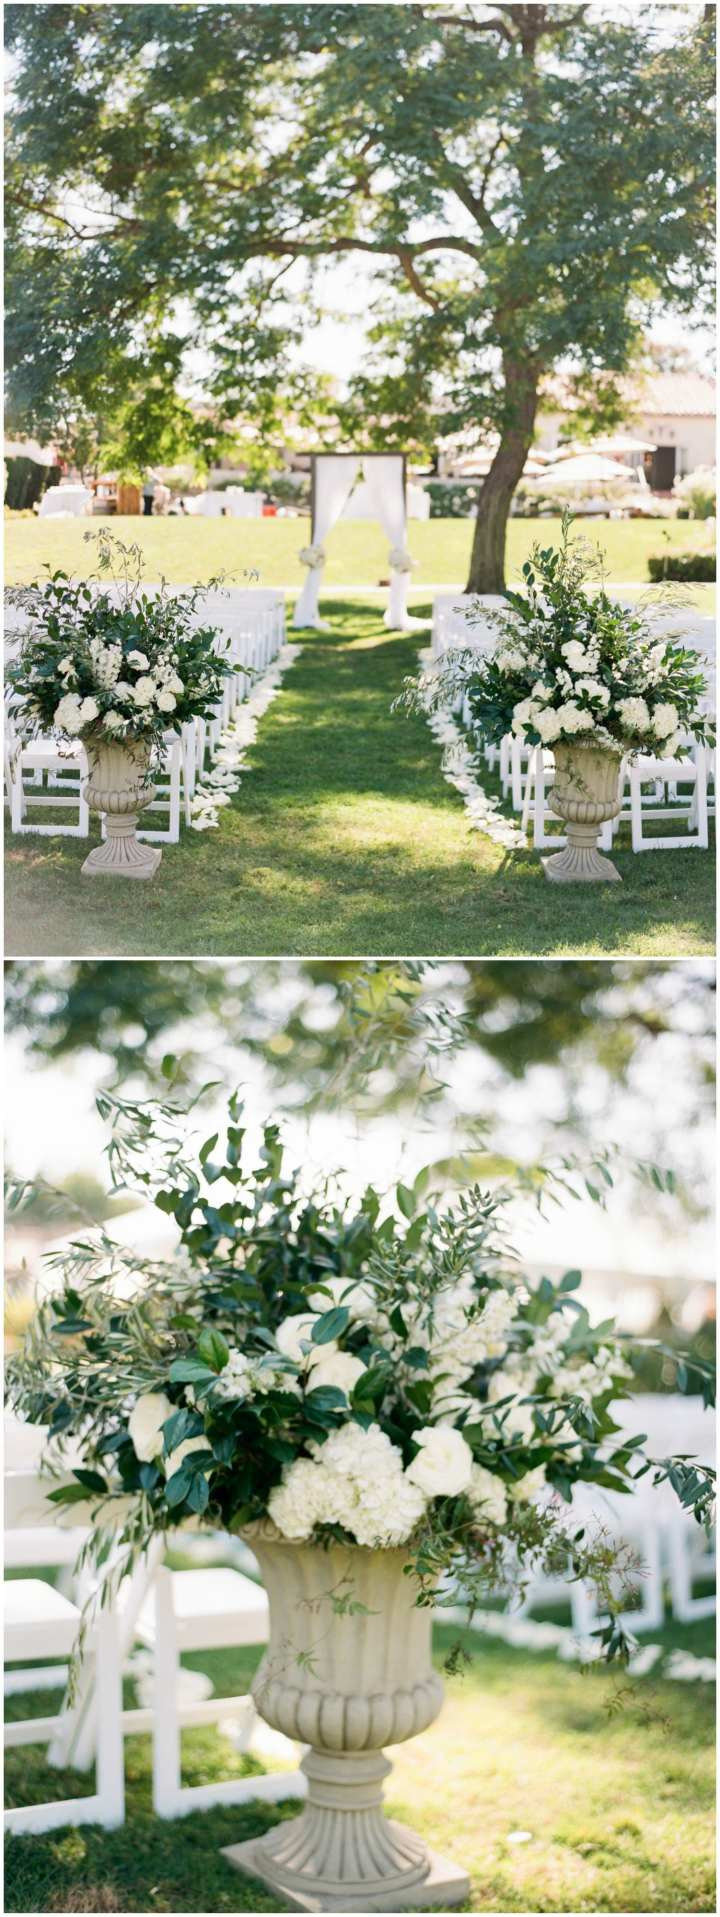 20 Awesome Wedding Flower Vases 2024 free download wedding flower vases of outdoor wedding ceremony lovely vases disposable plastic single with regard to outdoor wedding ceremony awesome the smarter way to wed wedding ceremony ideas pinteres